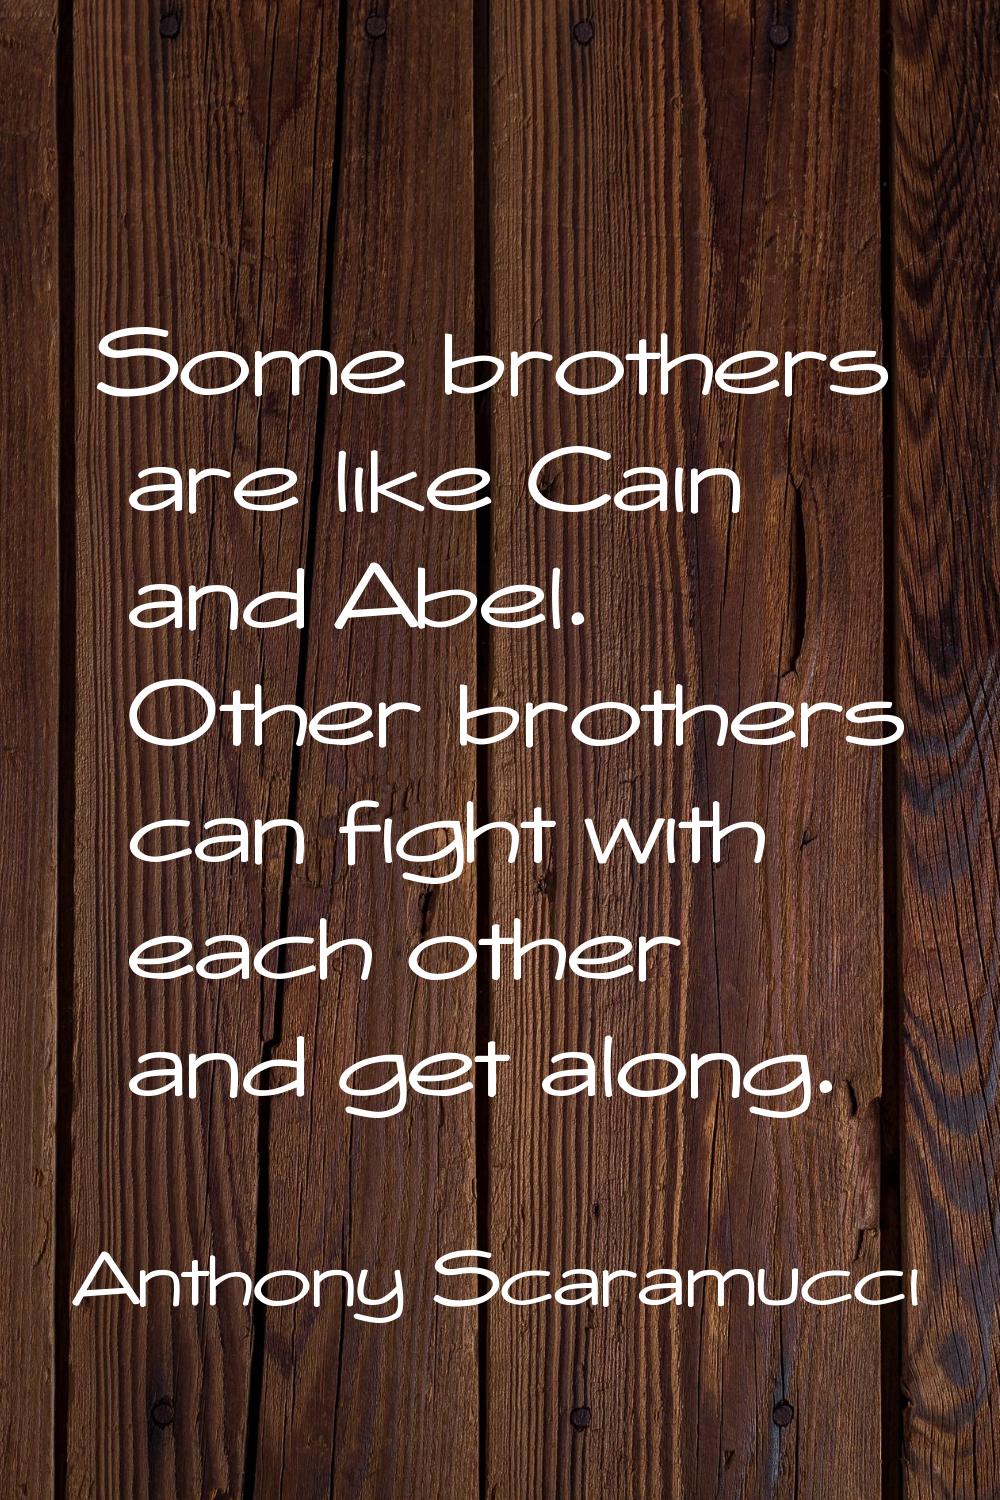 Some brothers are like Cain and Abel. Other brothers can fight with each other and get along.